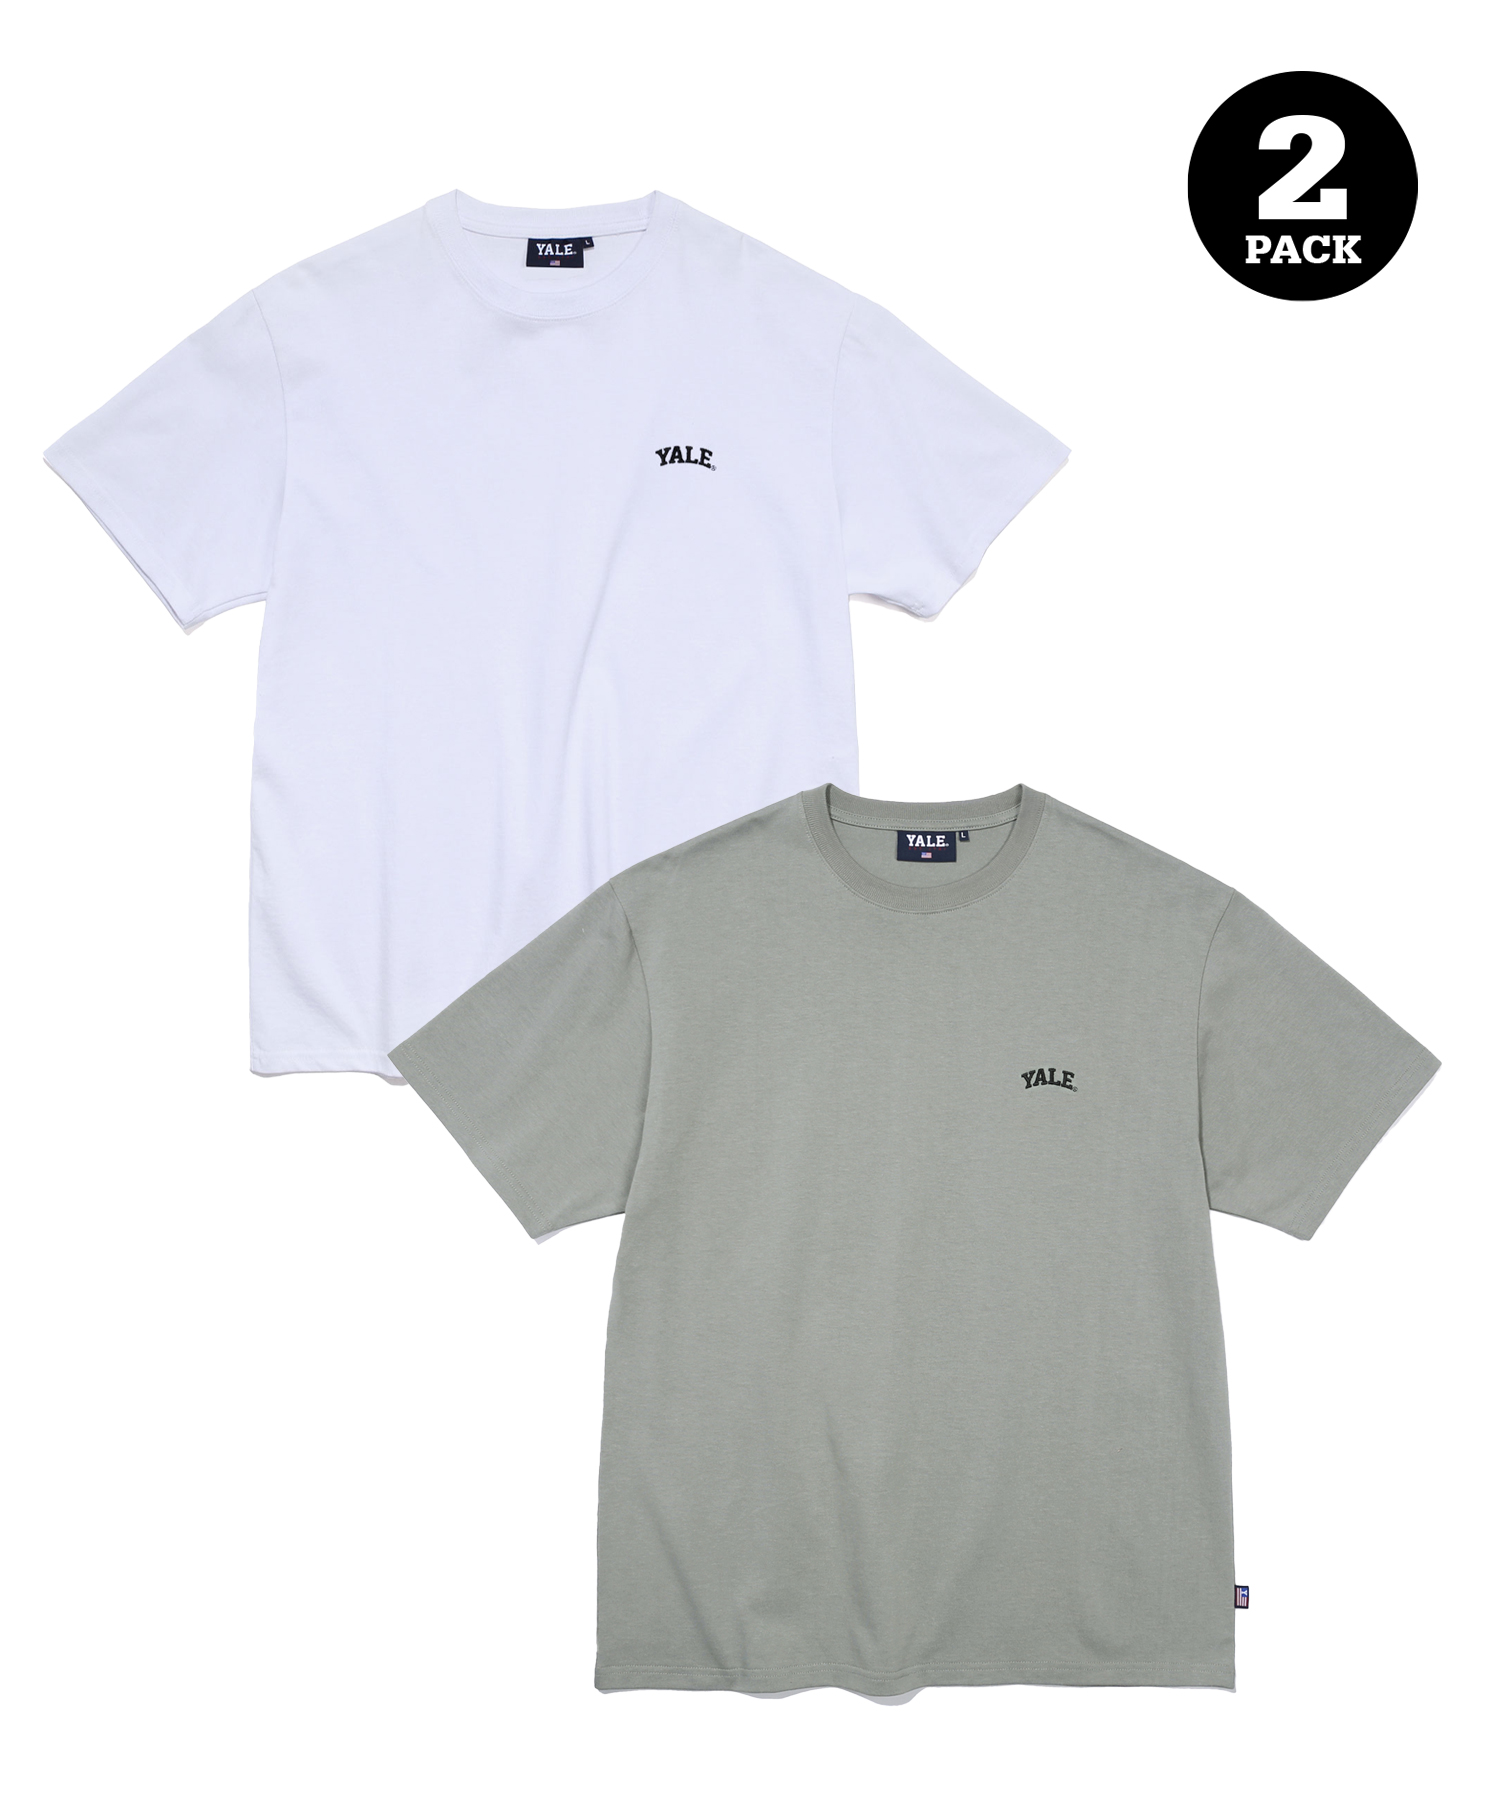 [ONEMILE WEAR] 2PACK SMALL ARCH TEE WHITE / KHAKI